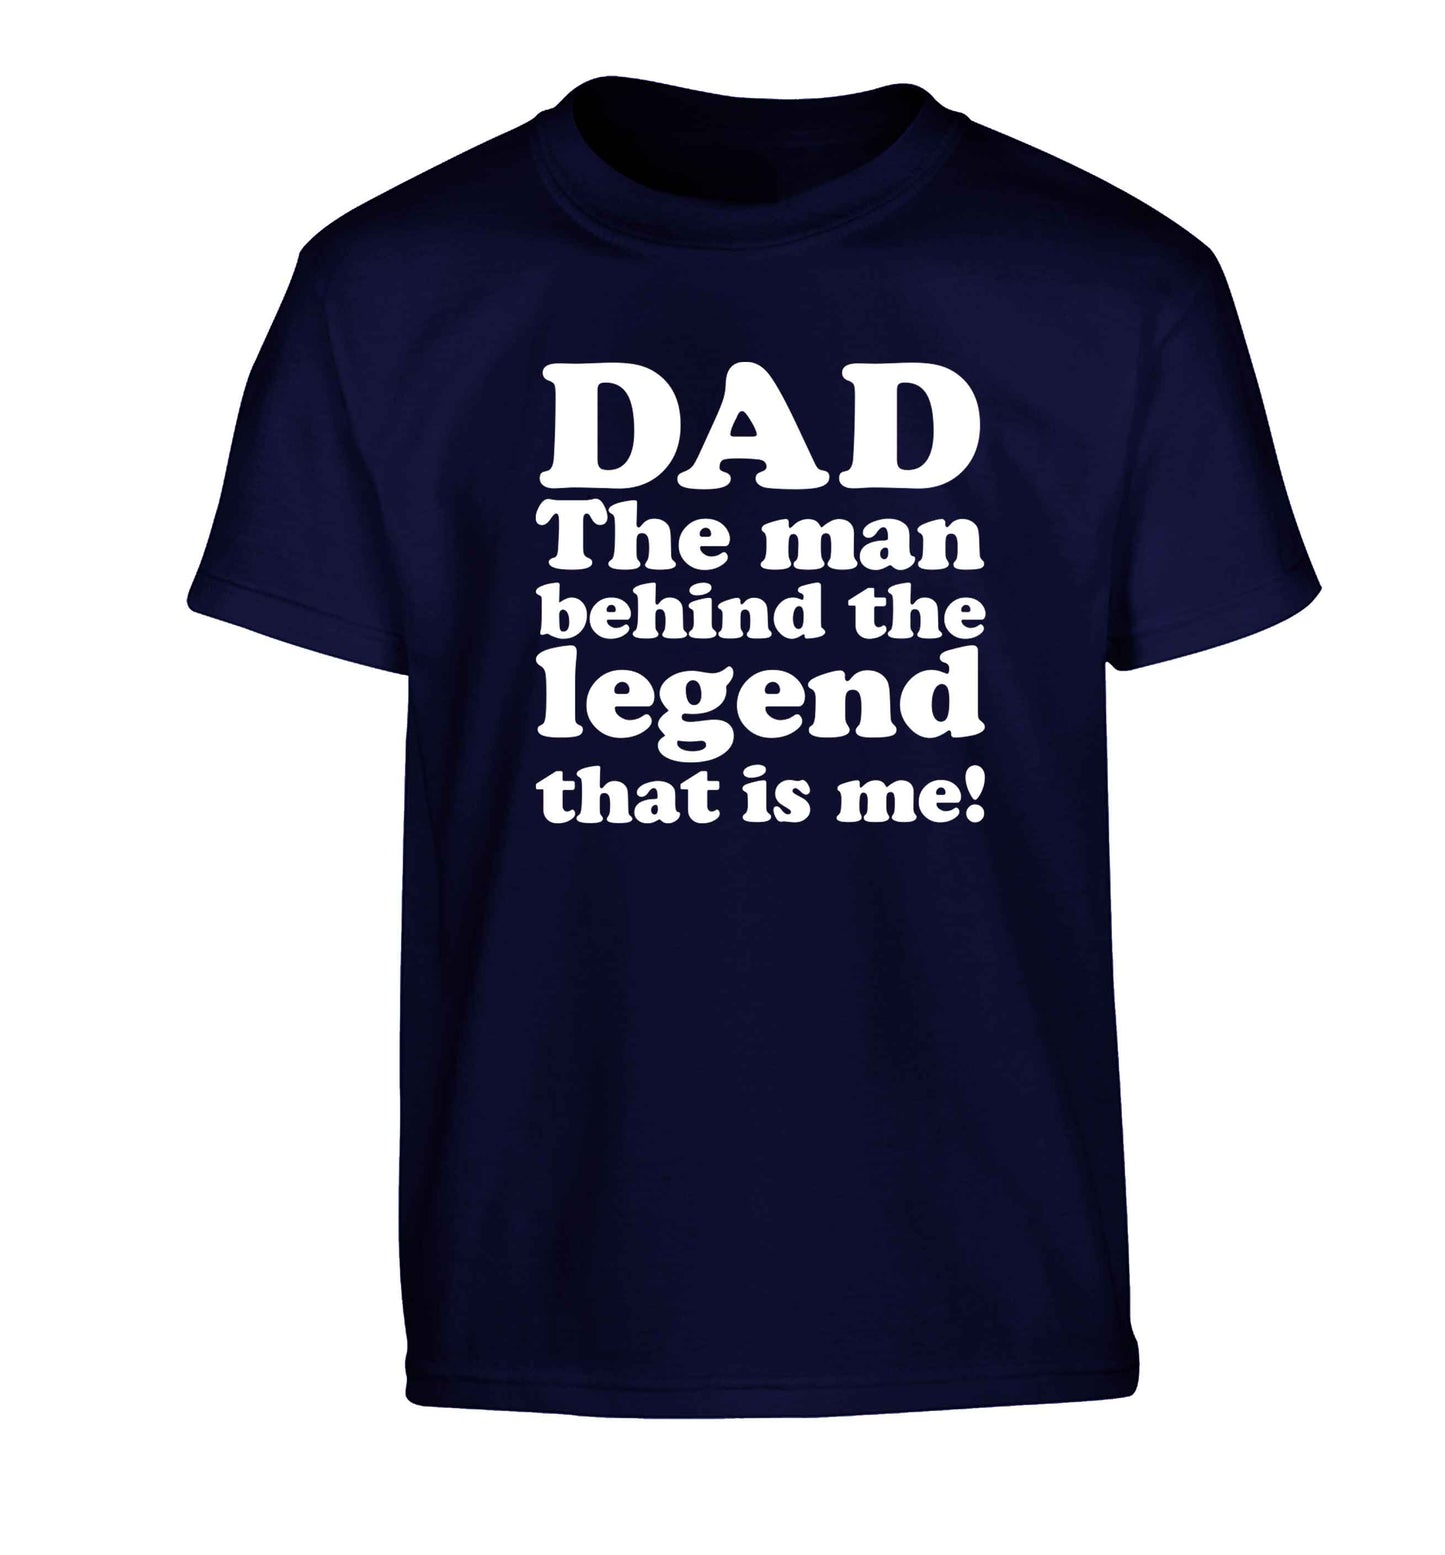 Dad the man behind the legend that is me Children's navy Tshirt 12-13 Years